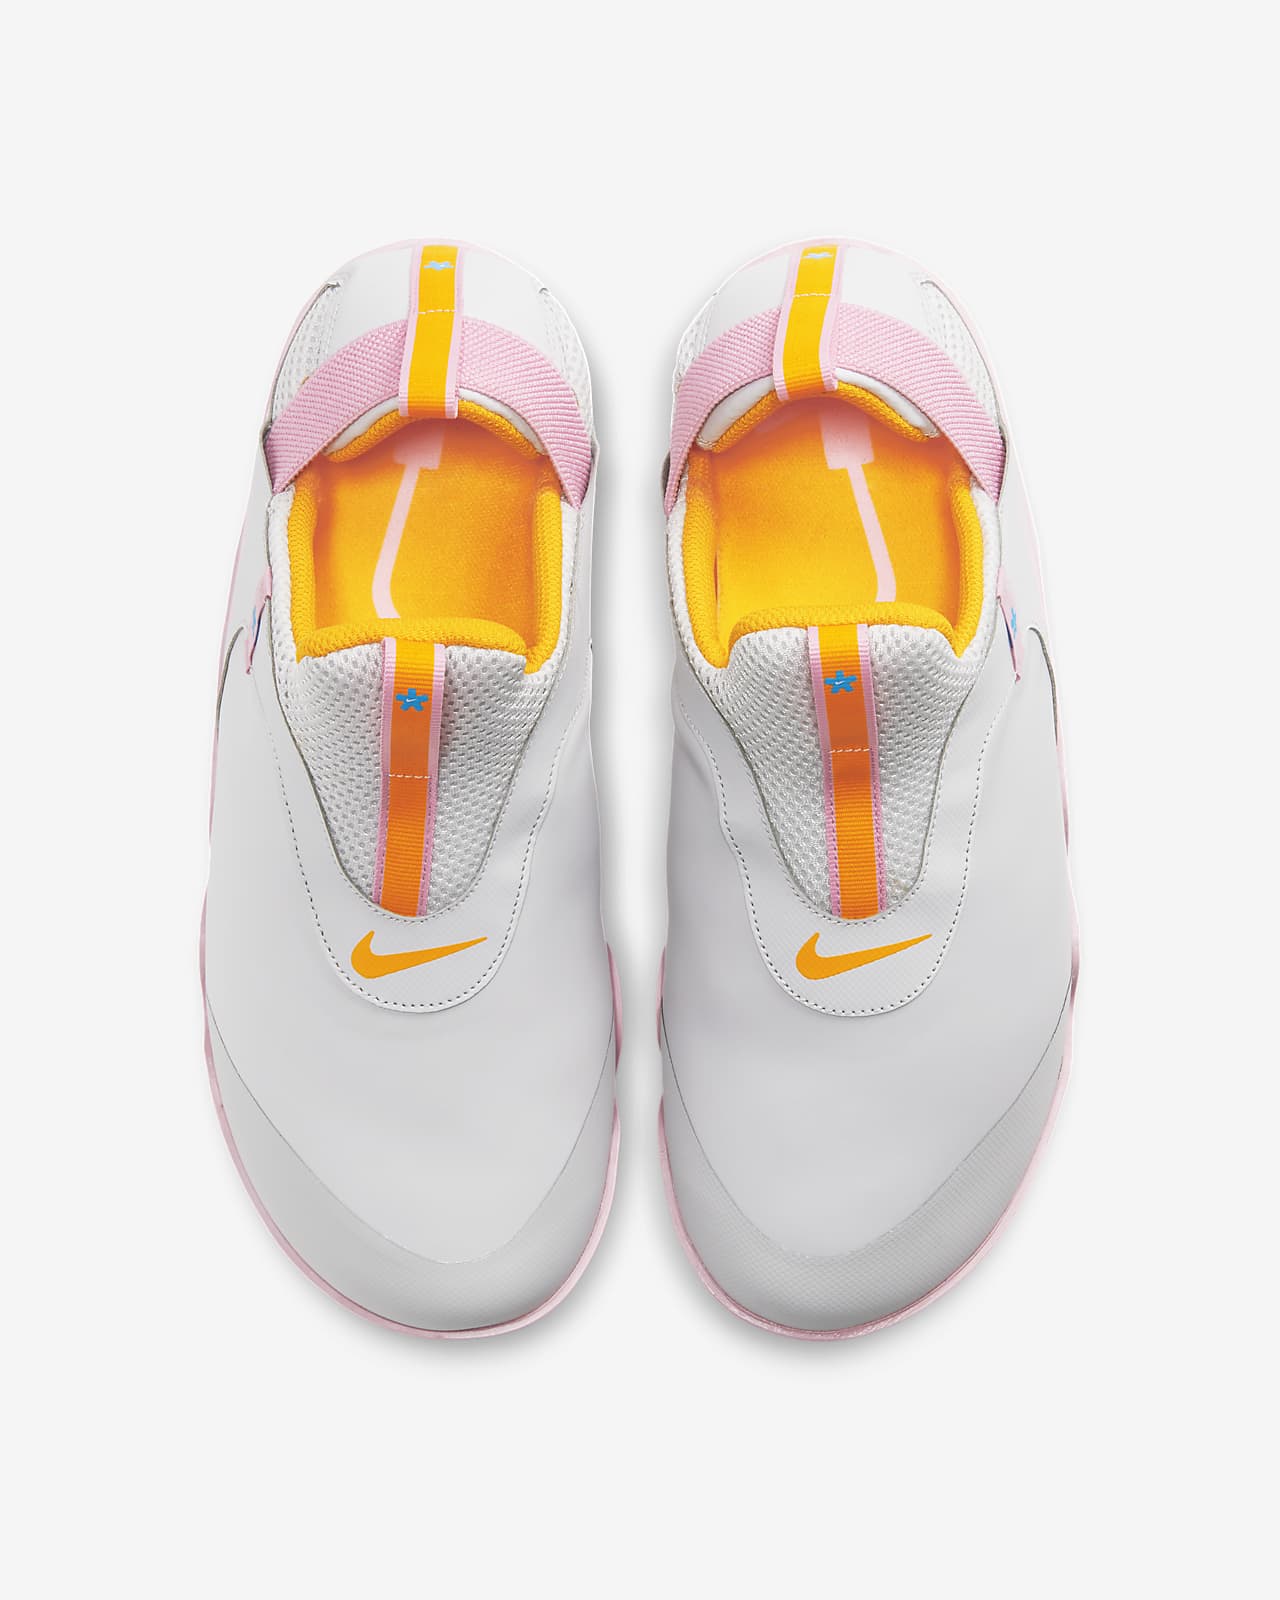 nike medical shoes cost